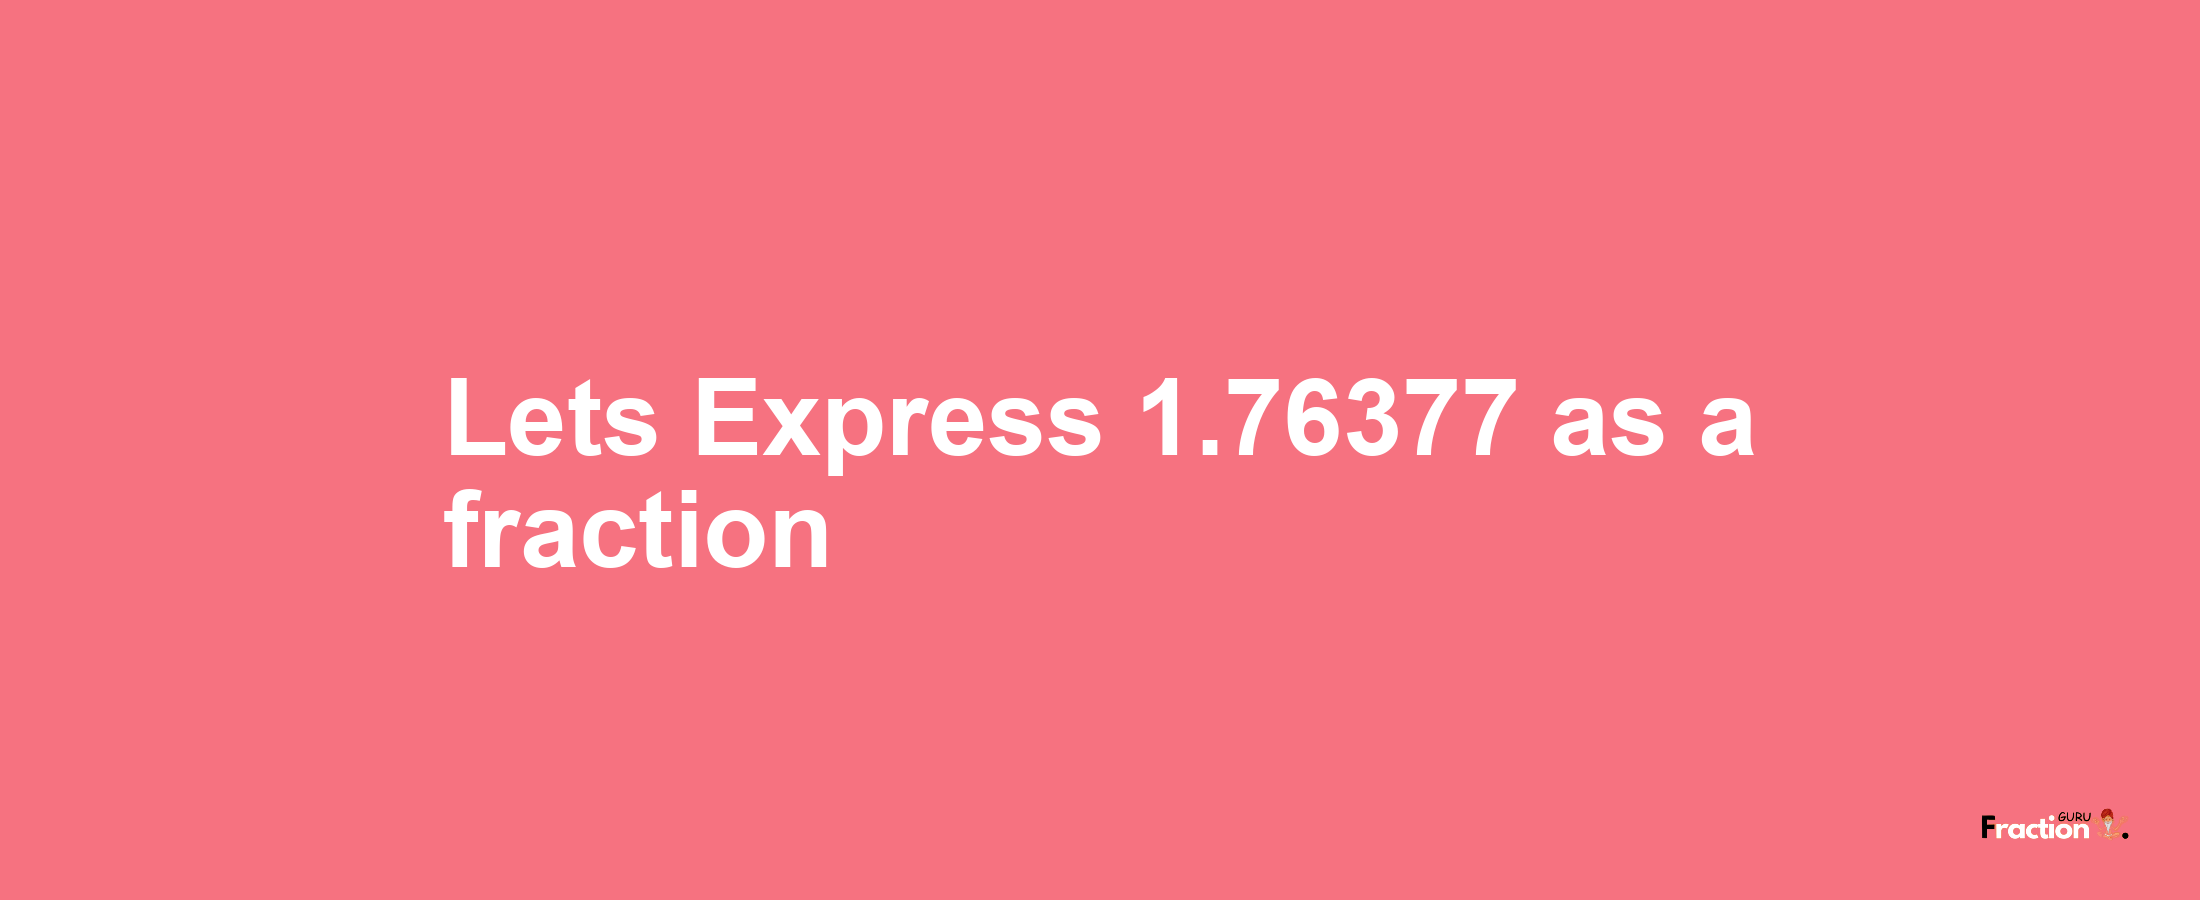 Lets Express 1.76377 as afraction